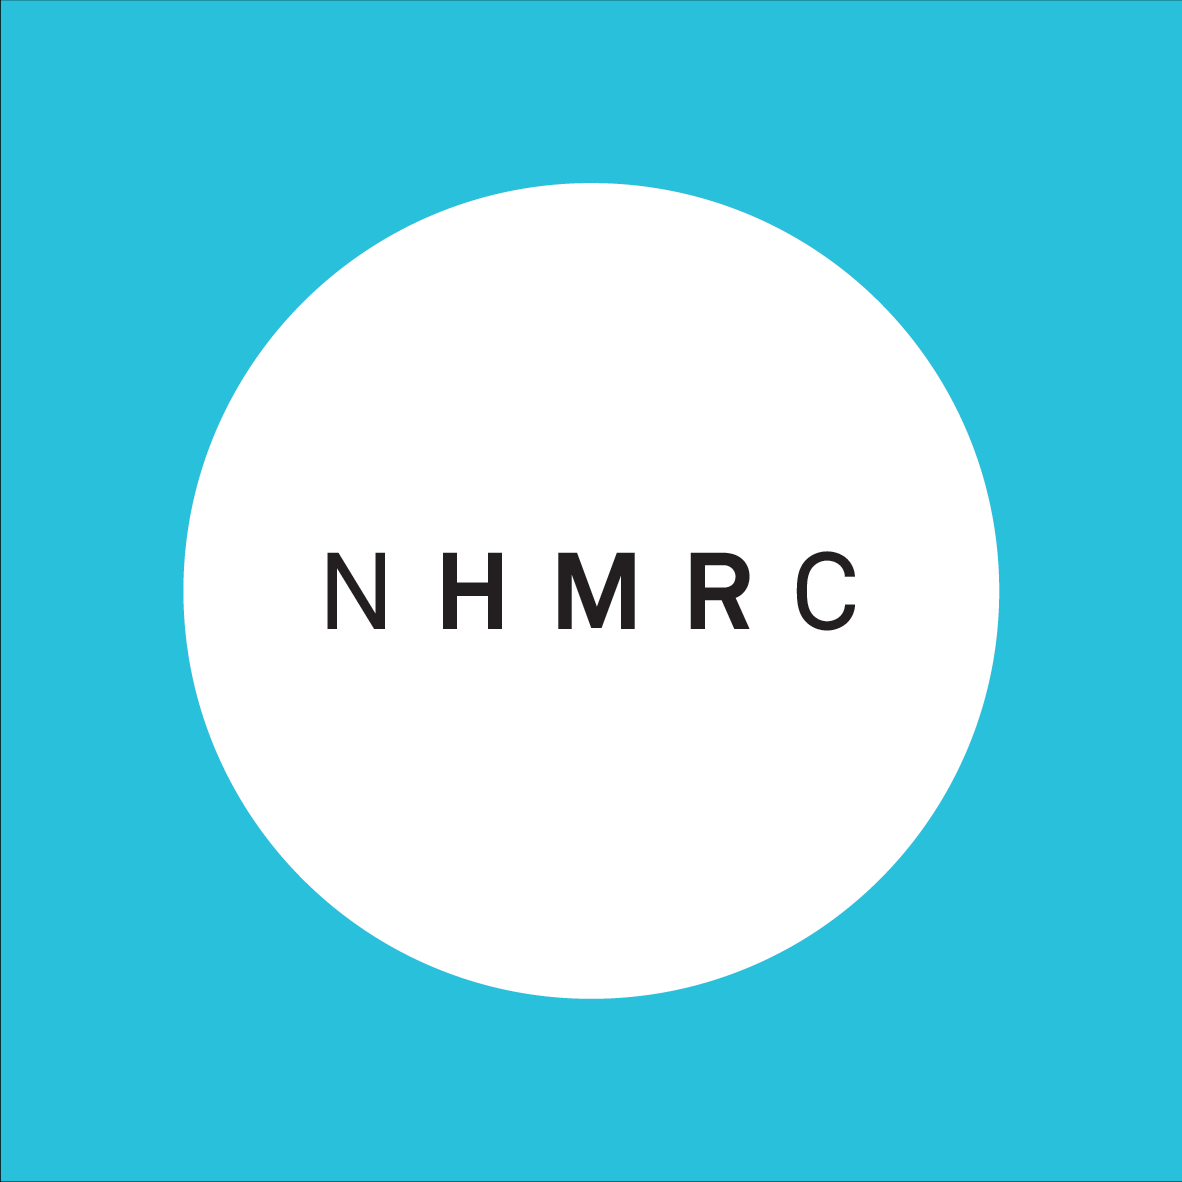 National Health and Medical Research Centre logo